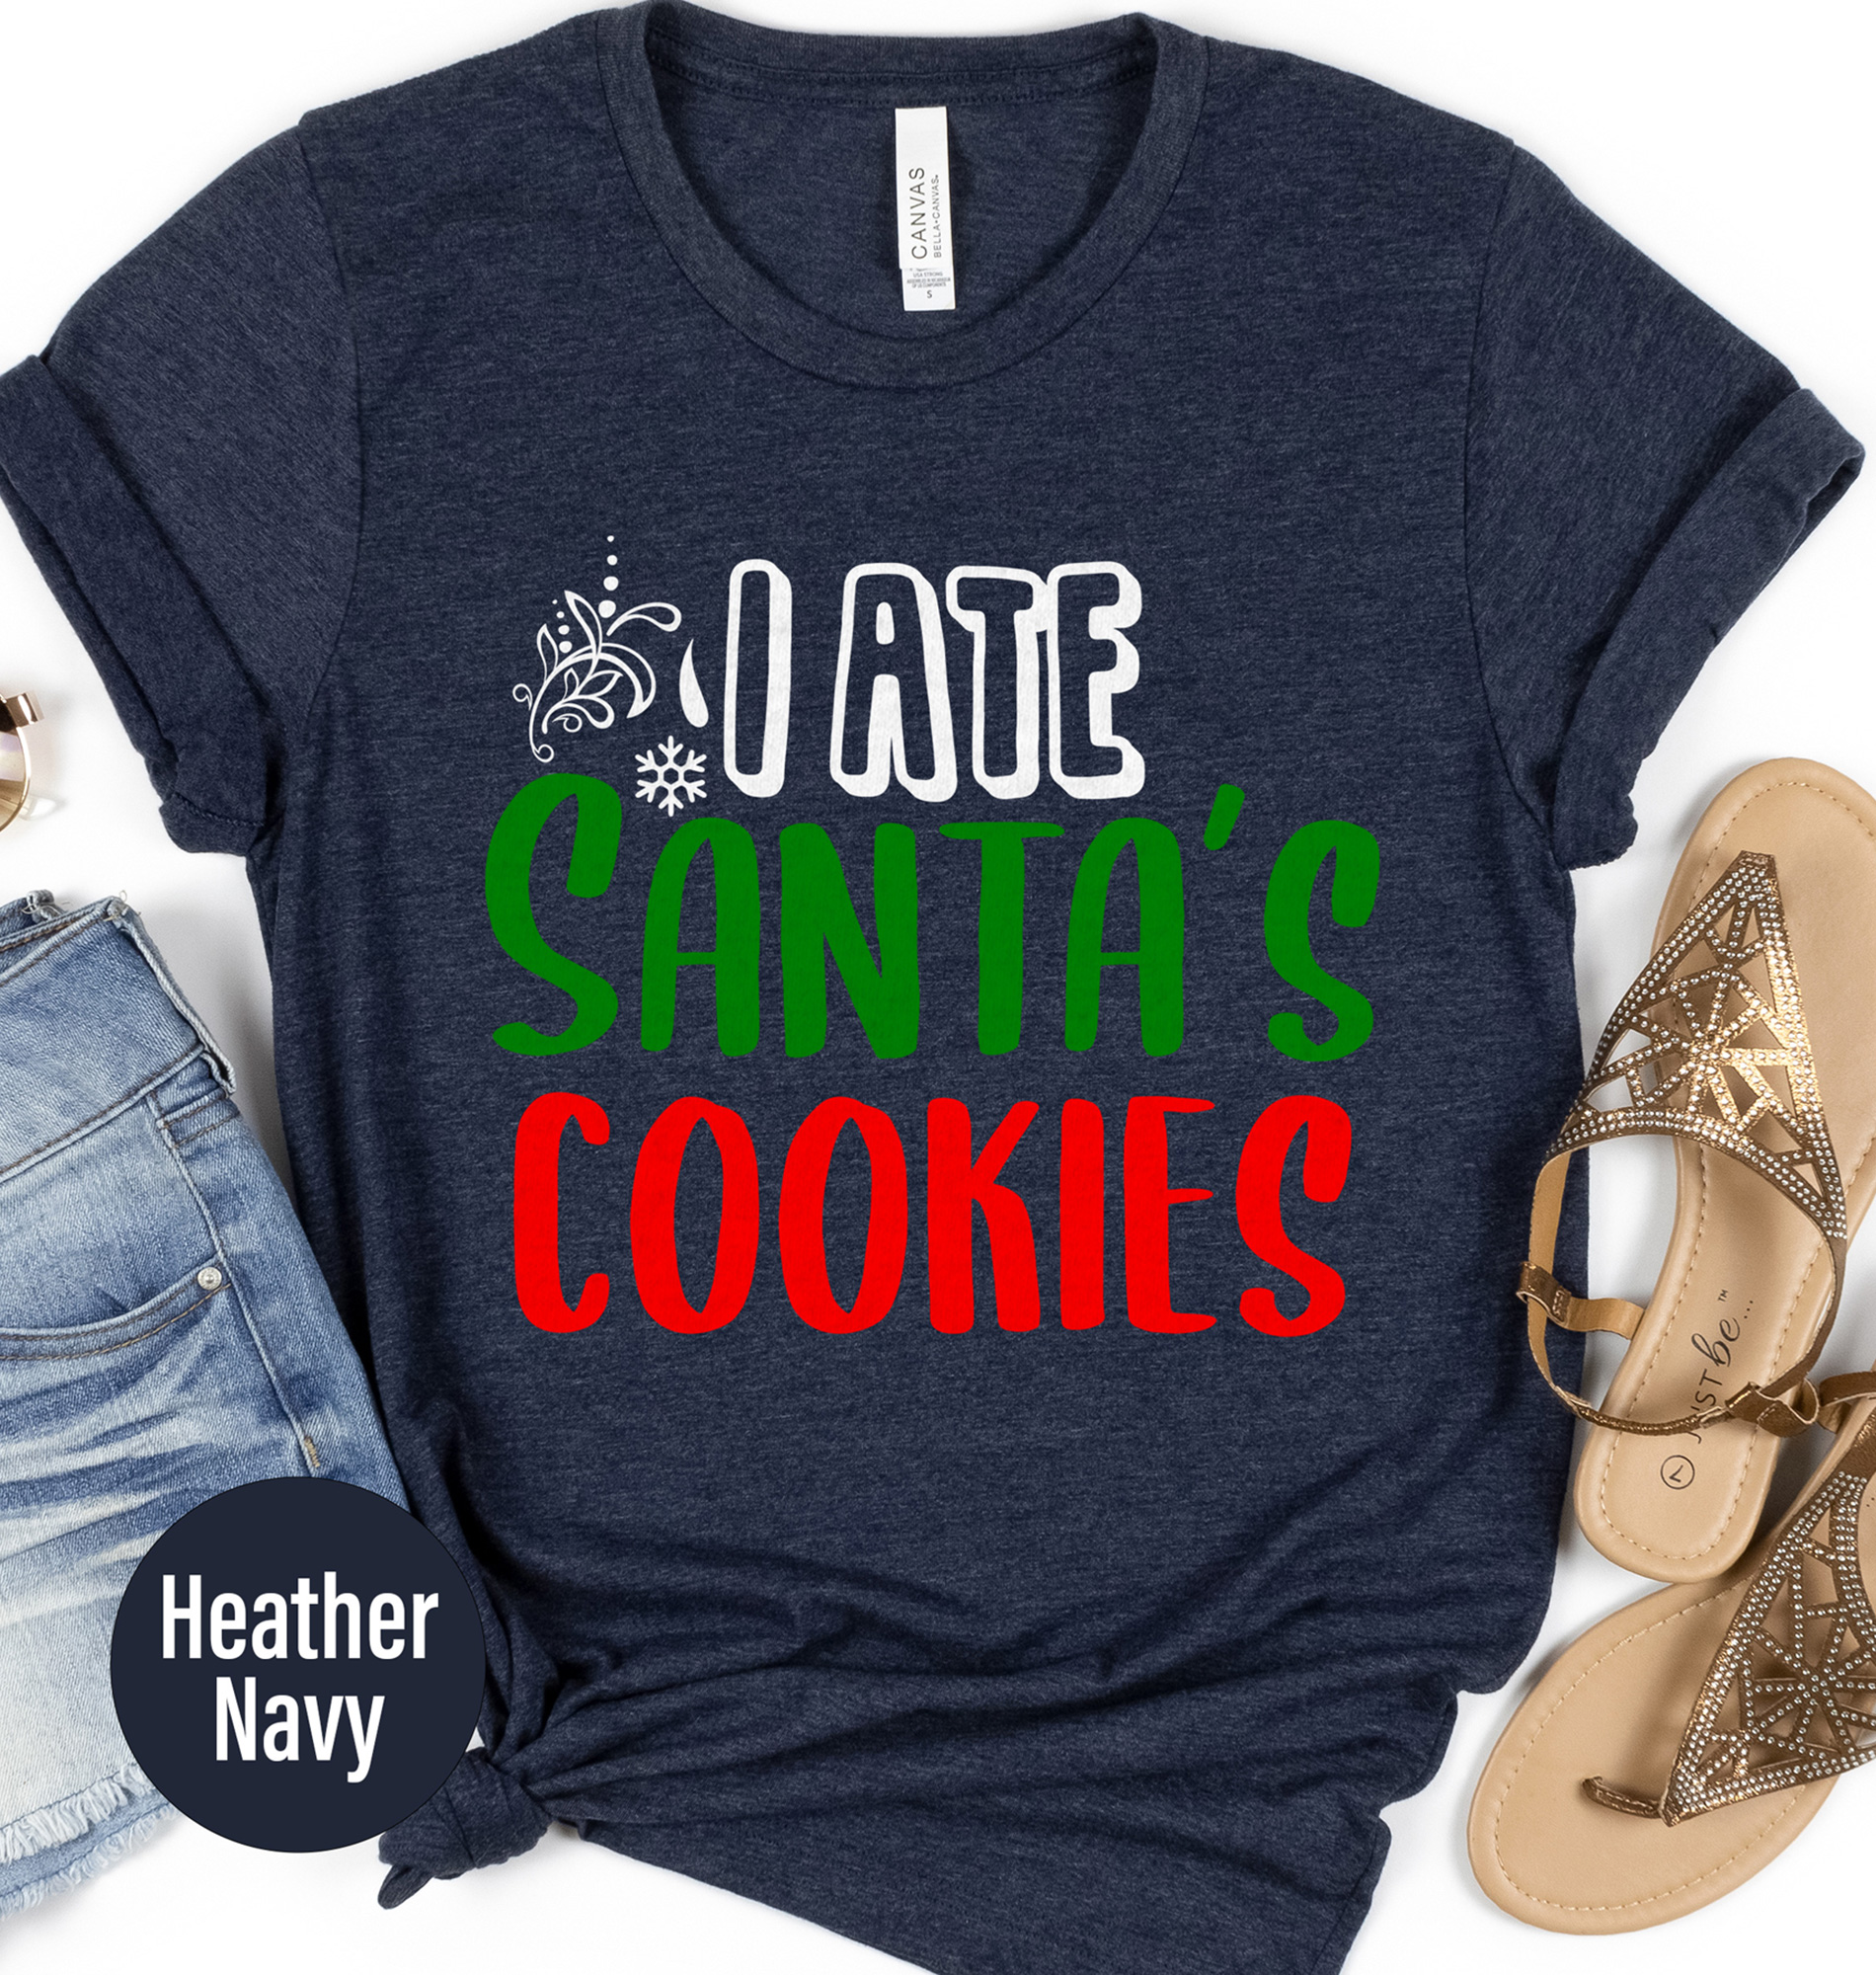 Christmas Cookie Lover's Holiday Tee - I Ate Cookies